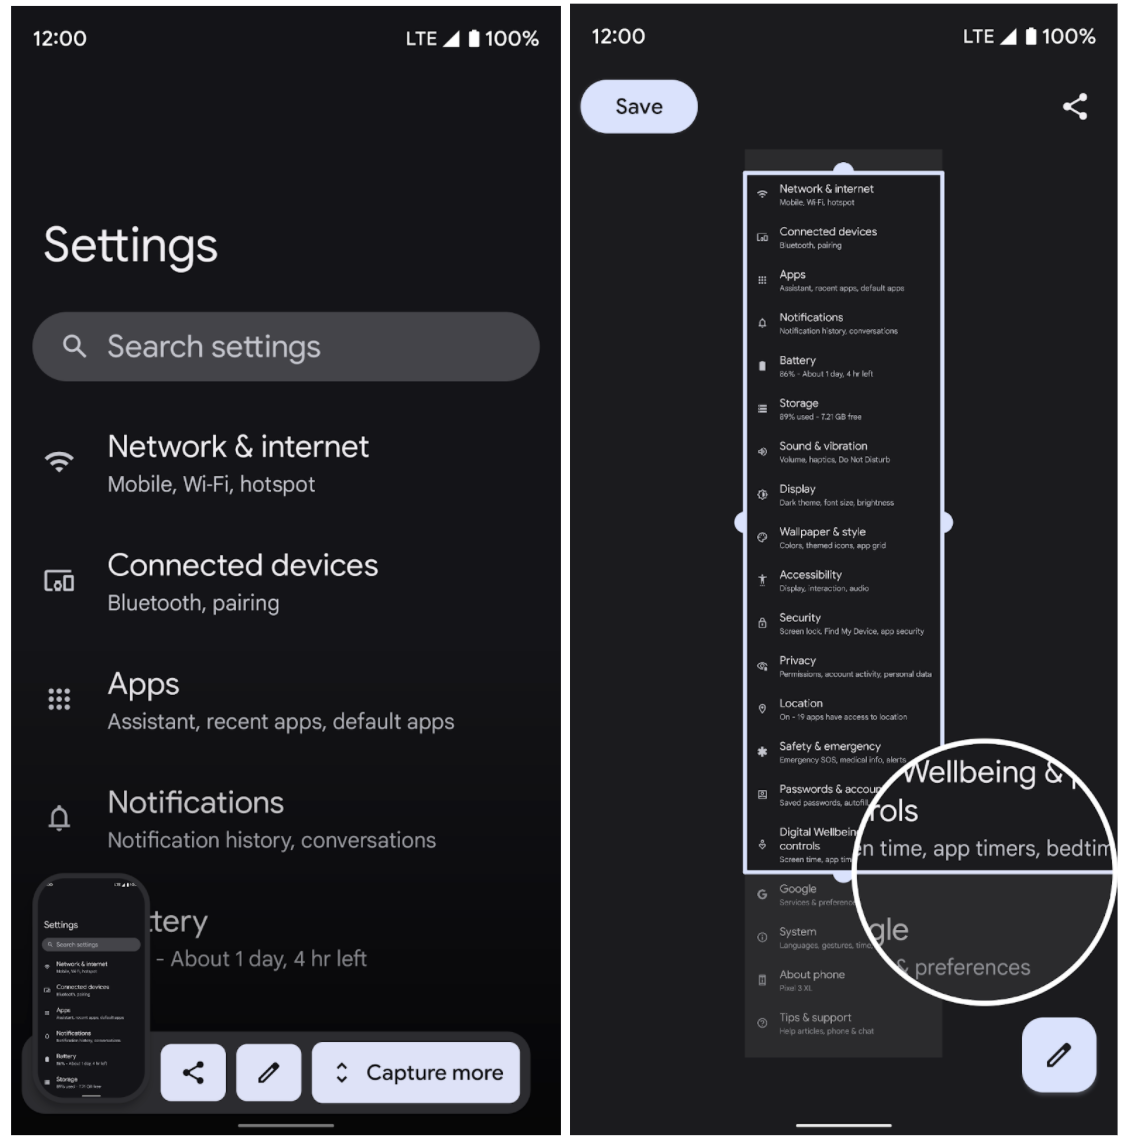 capturing a scrolling screenshot in the Settings app